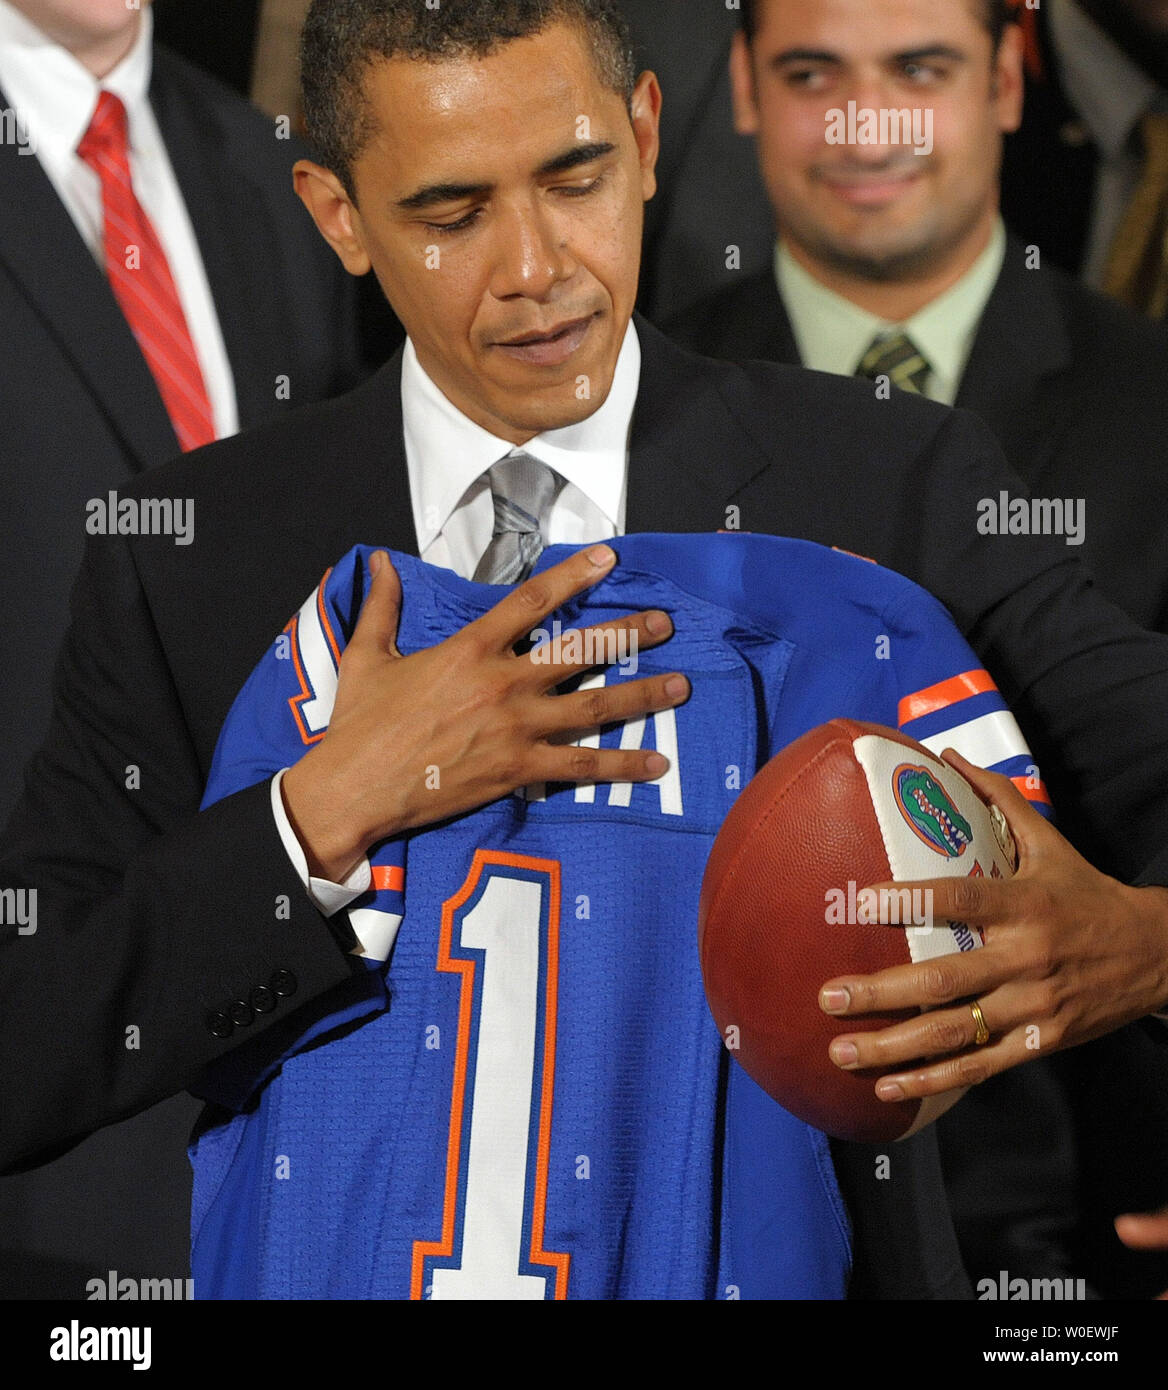 U.S. President Barack Obama stands with the jersey and football presented to him by the University of Florida Gators football team, whom he congratulated on winning the 2009 BCS National Championship, in the East Room of the White House in Washington on April 23, 2009.    (UPI Photo/Roger L. Wollenberg) Stock Photo